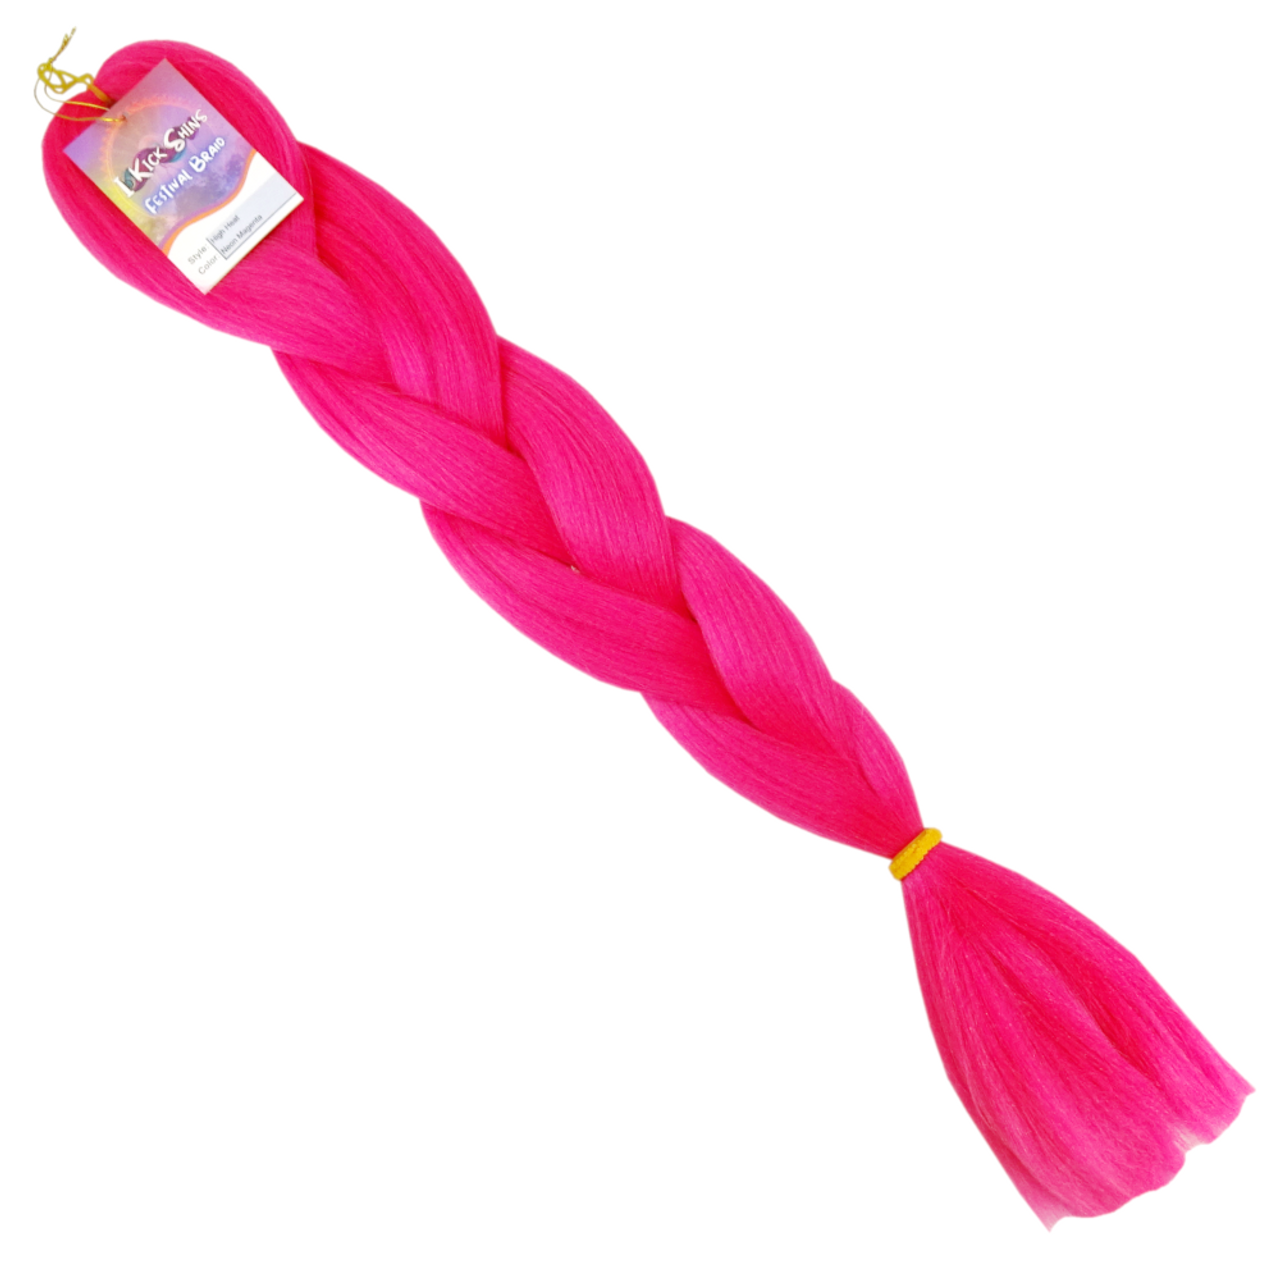 https://cdn11.bigcommerce.com/s-53ppxpd/images/stencil/1280x1280/products/1257/41665/festivalbraid-neonmagenta-packaging__56520.1687905305.png?c=2